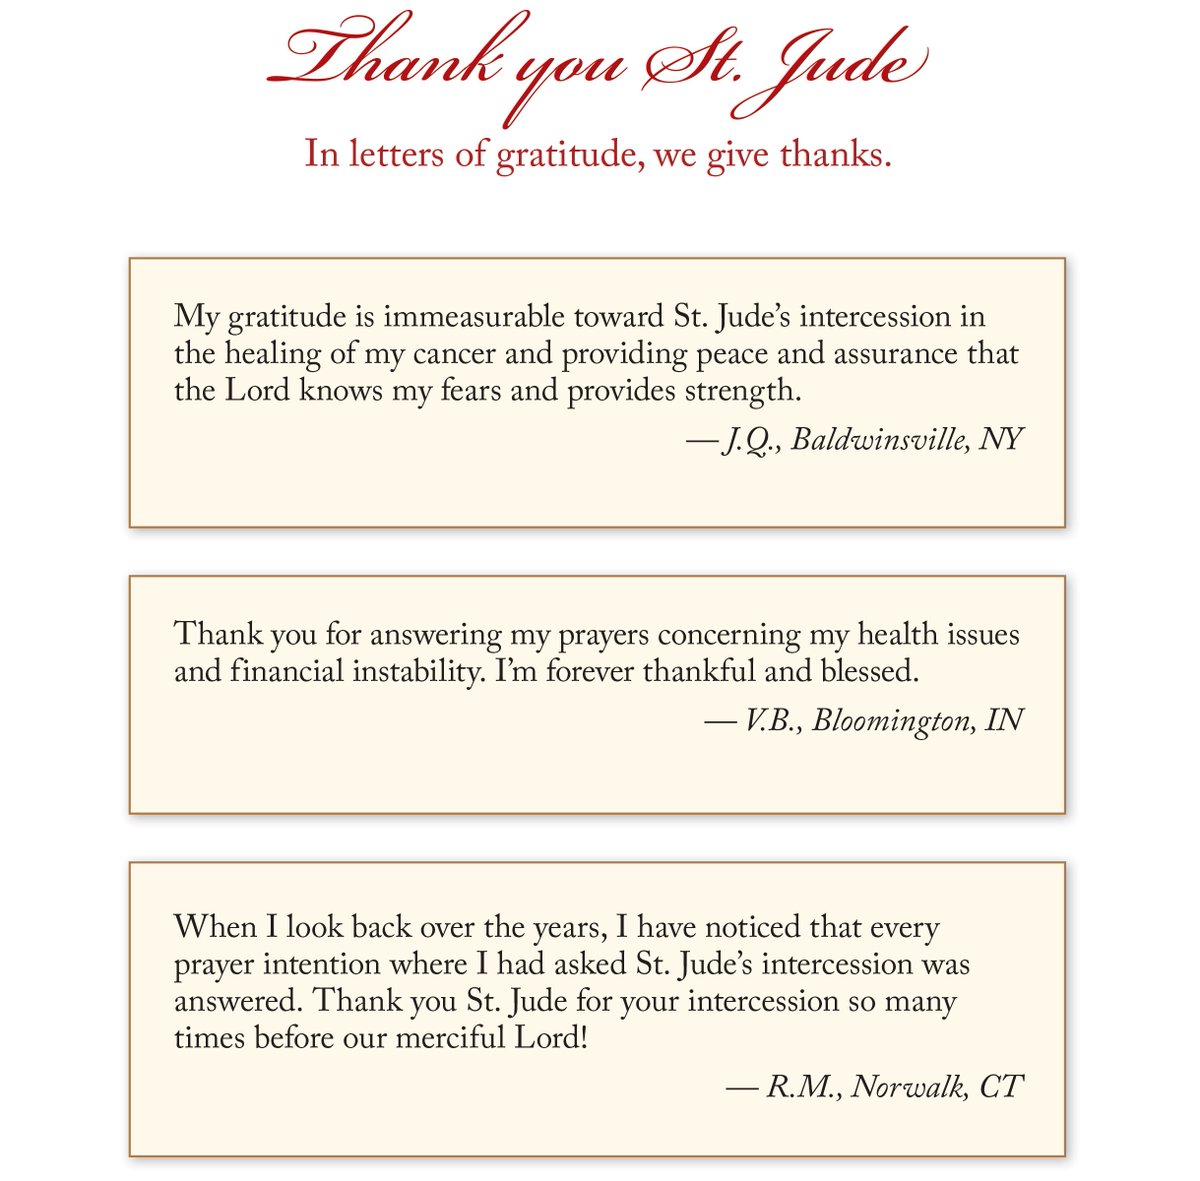 In letters of gratitude, we give thanks.

Consider sharing your own Letter of Gratitude and join the many St. Jude devotees who share God’s blessings received through our Patron’s intercession: bit.ly/sendlettersofg…

-

#ThankYouStJude #StJudePrayForUs #lettersofgratitude